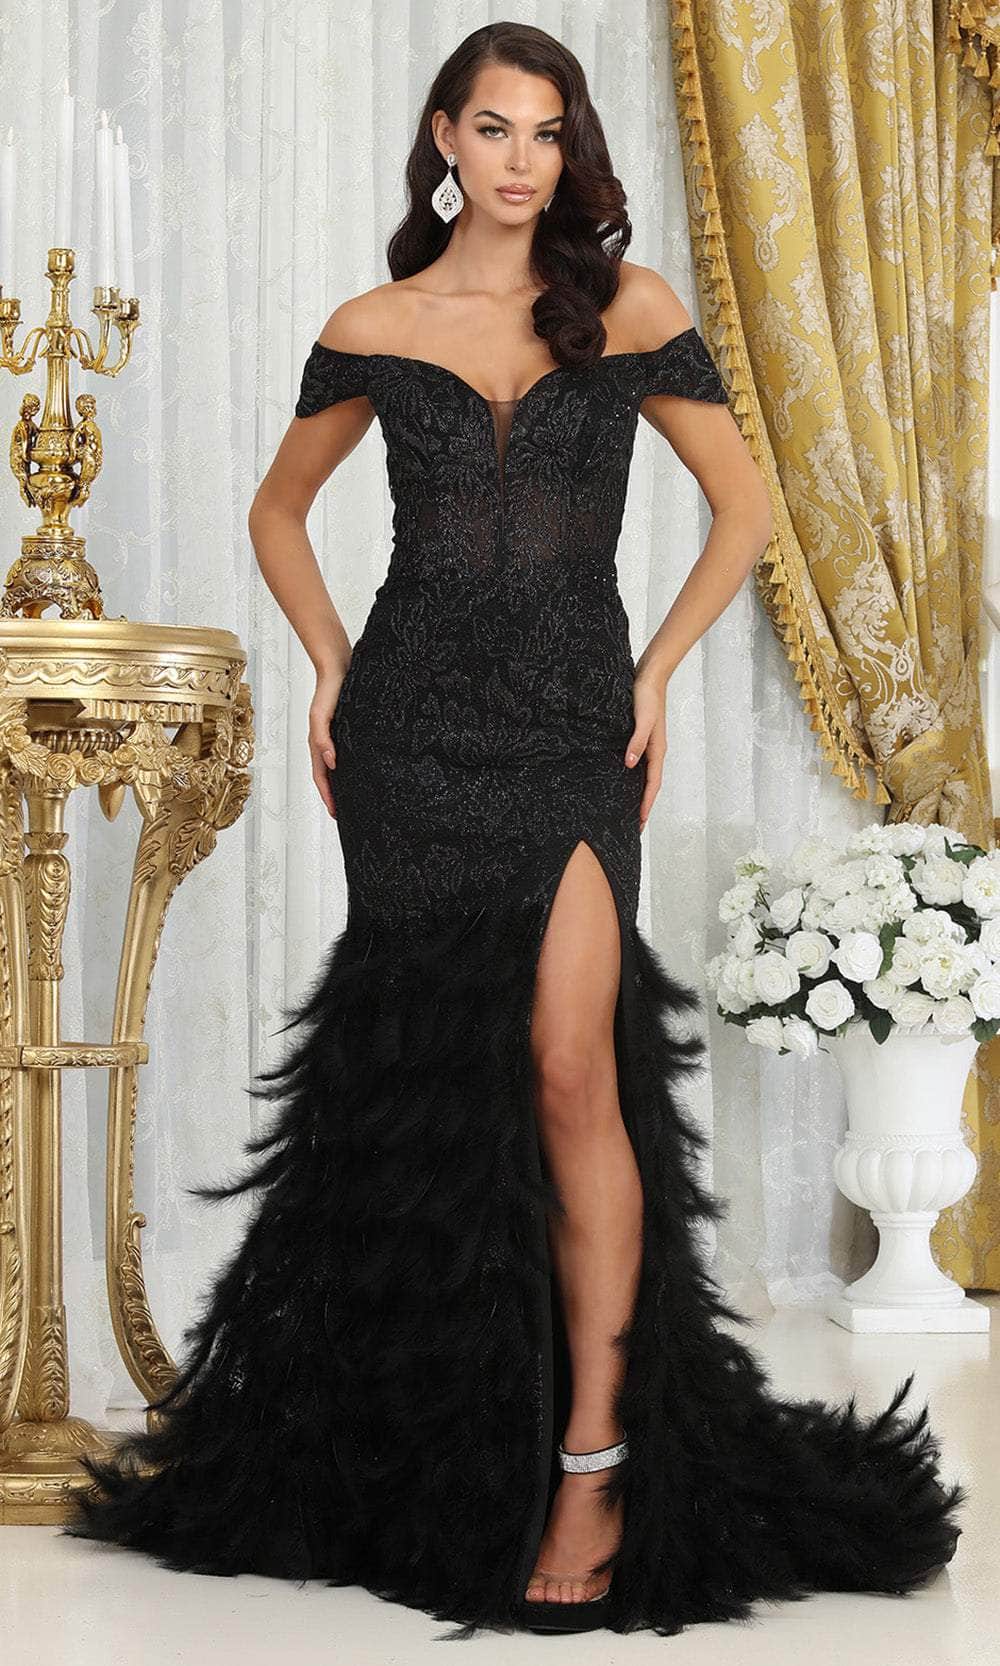 May Queen RQ8093 - Cap Sleeve Trumpet Prom Gown Prom Dresses 4 / Black